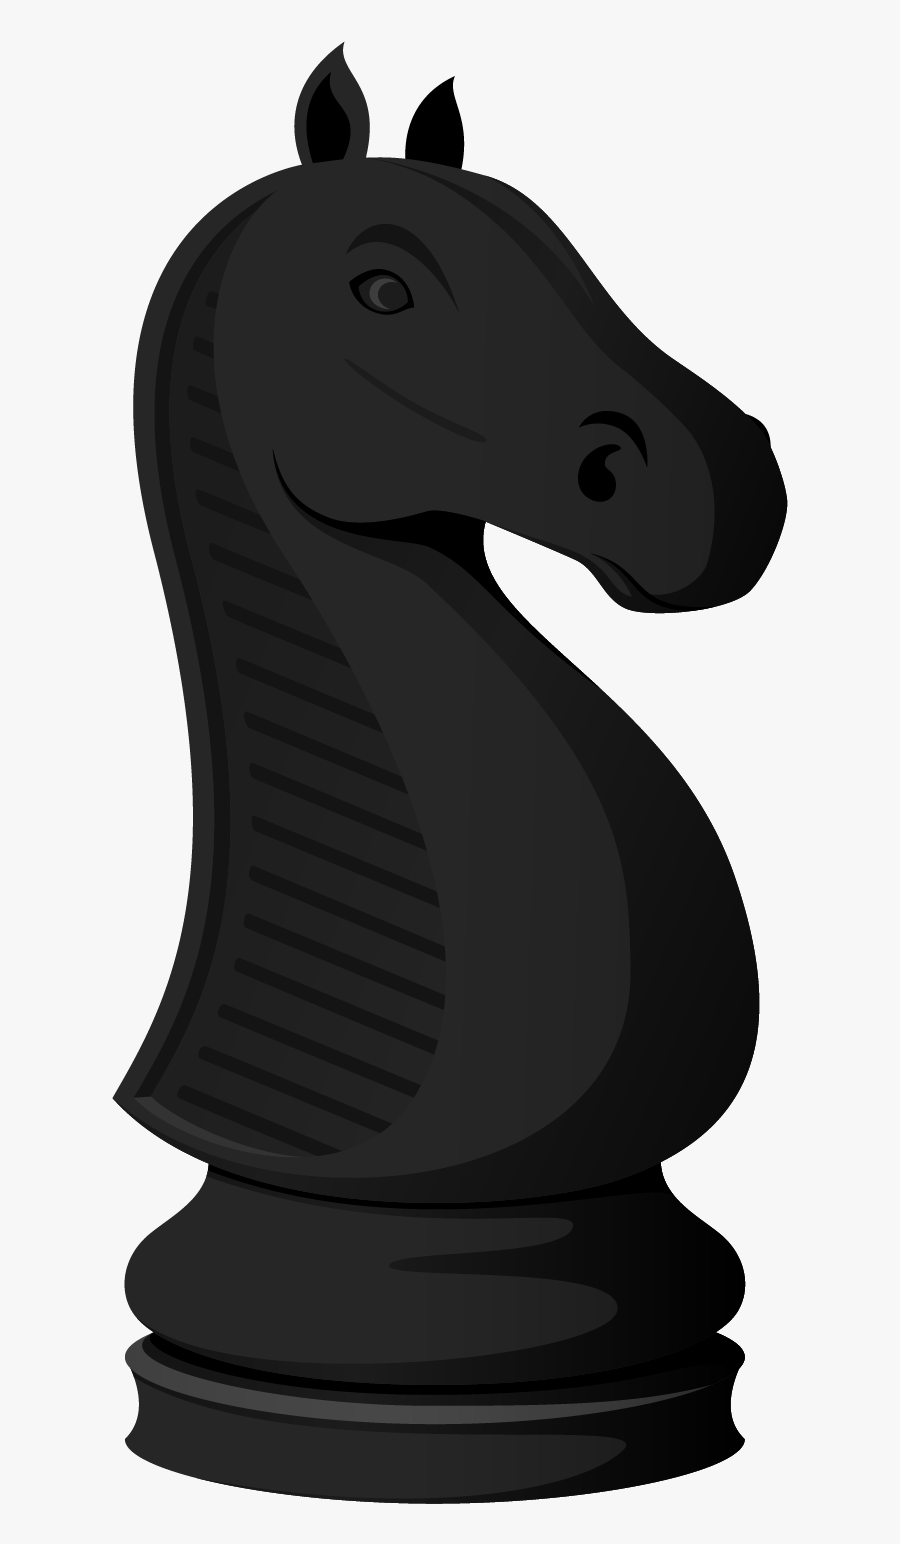 Strategy Of Asset Management - Knight Chess Piece Png, Transparent Clipart